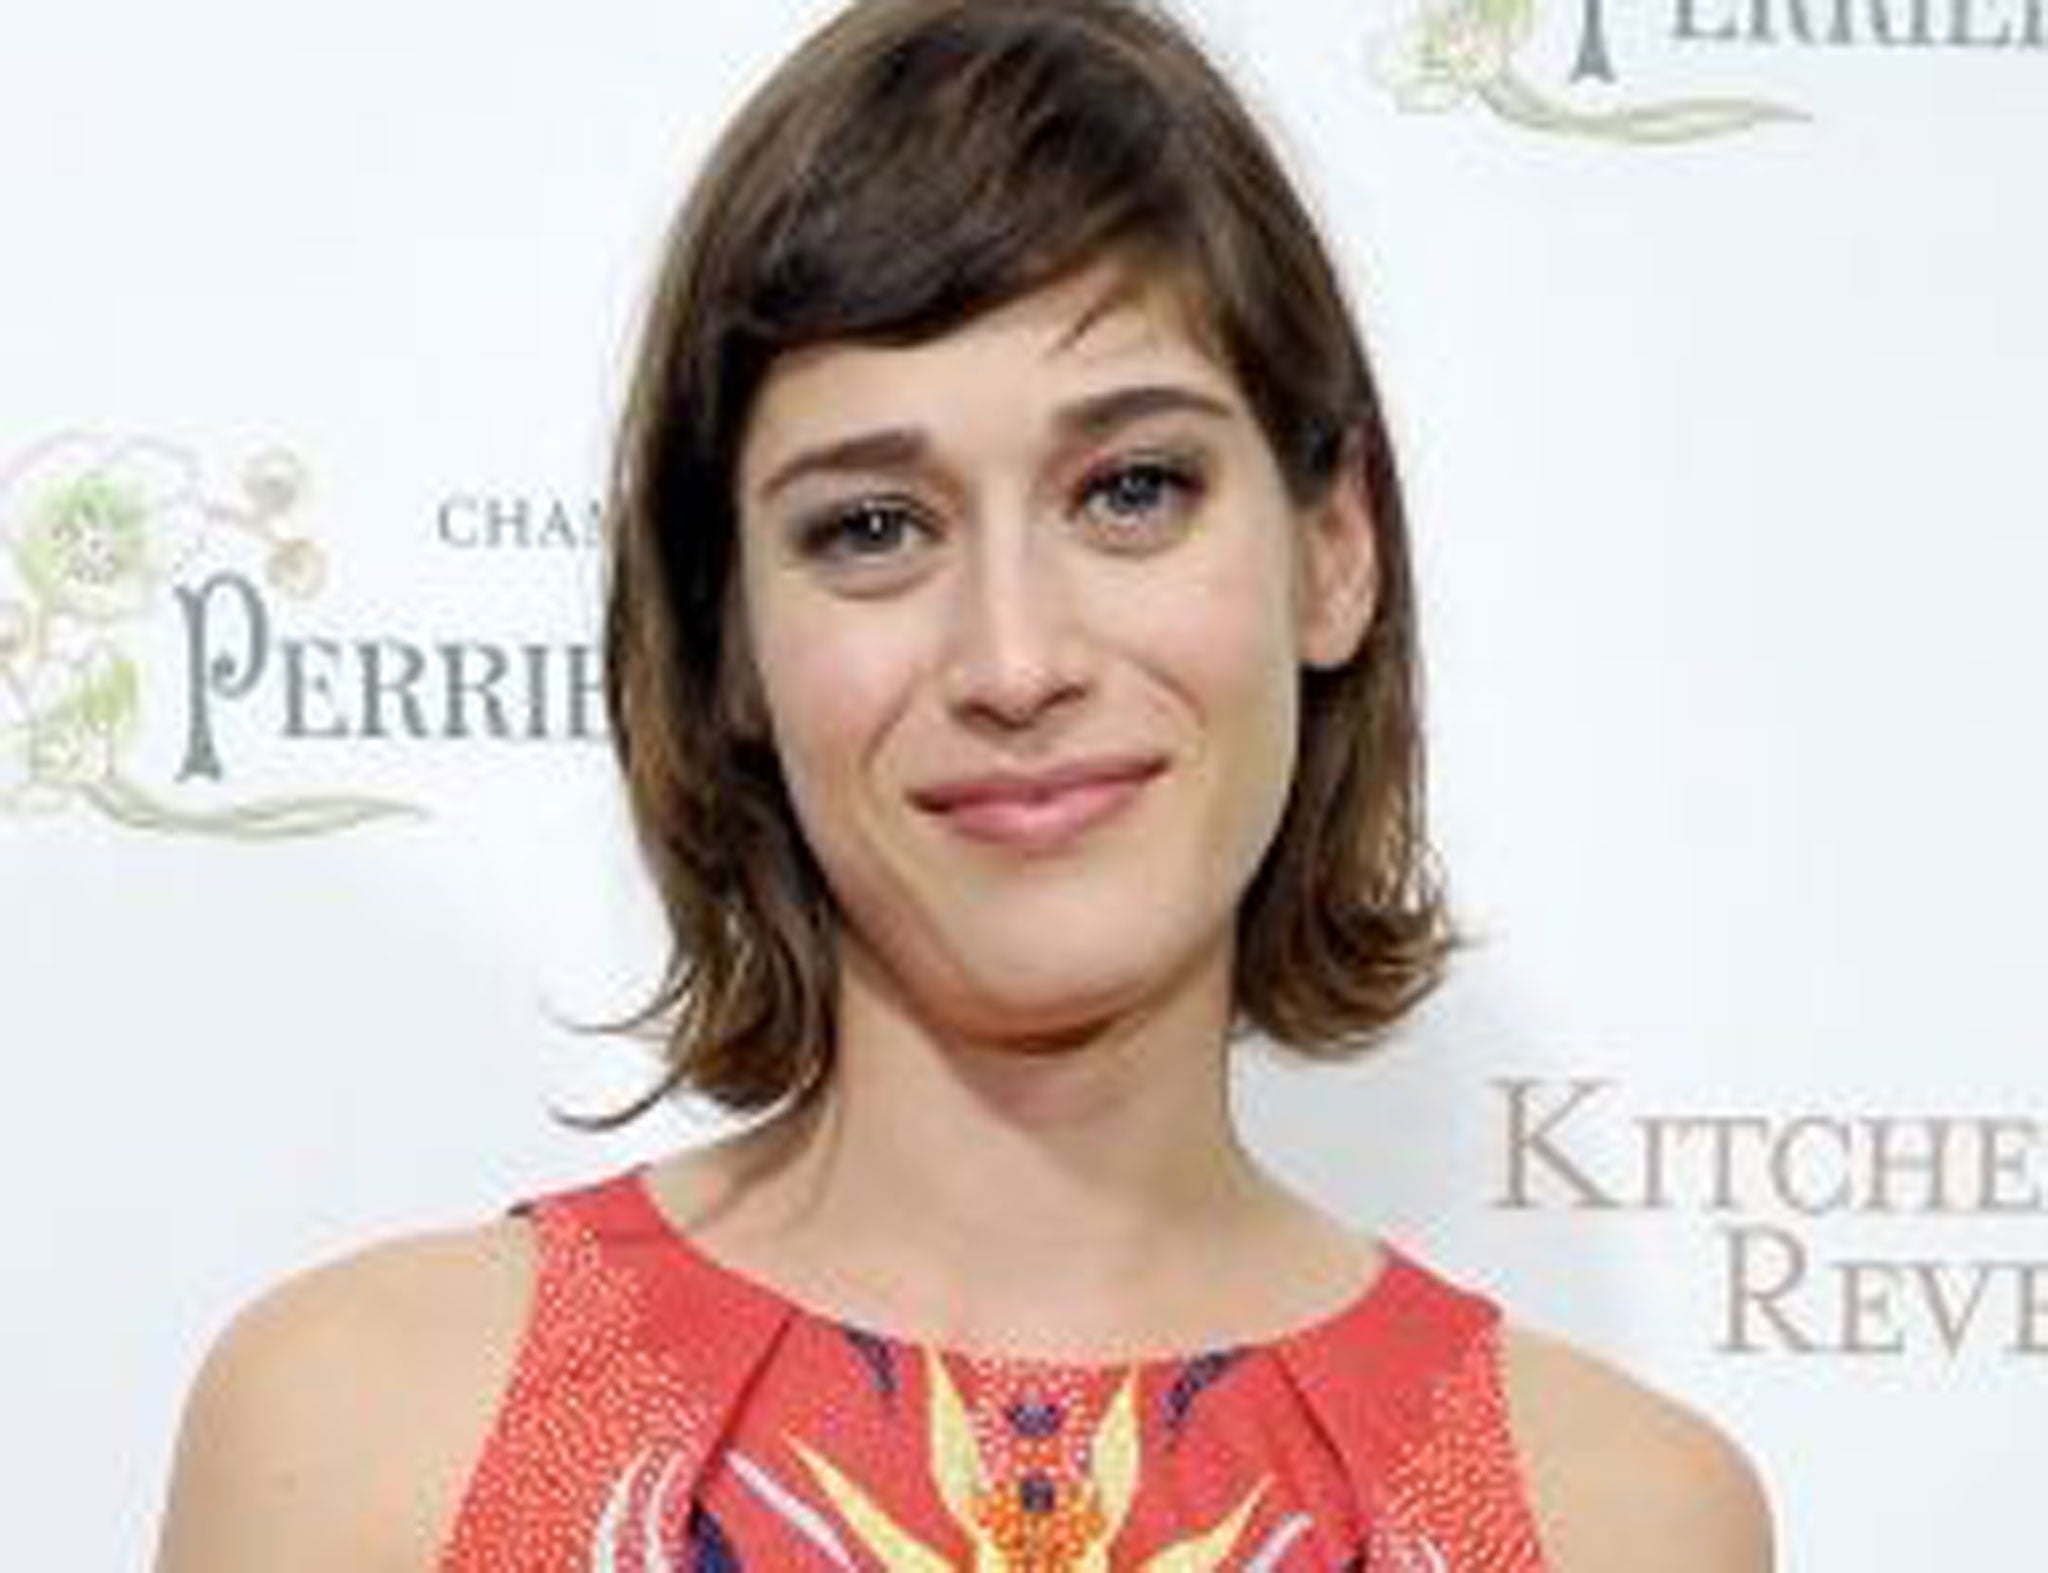 Lizzy Caplan will star in Seth Rogen/James Franco comedy The Interview